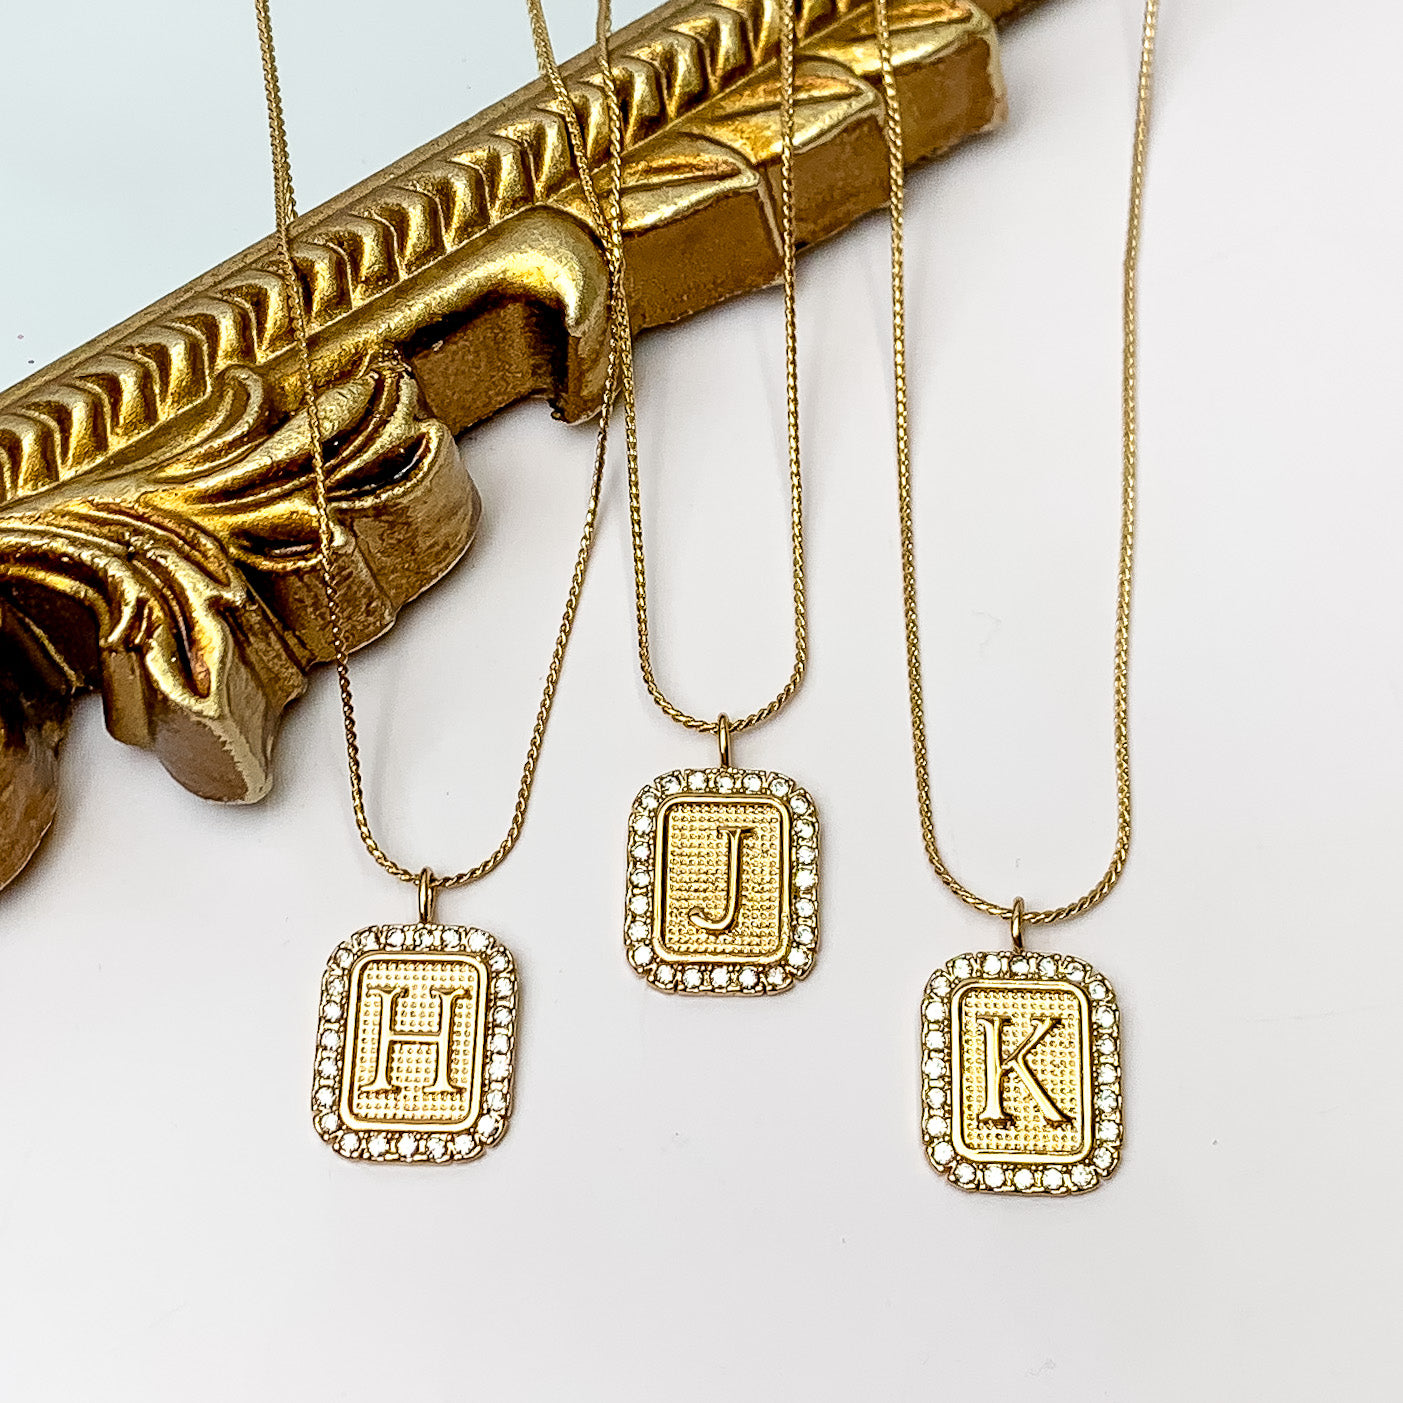 Gold Tone Chain Necklace with Rectangle Initial Pendant Outlined in Clear Crystals - Giddy Up Glamour Boutique